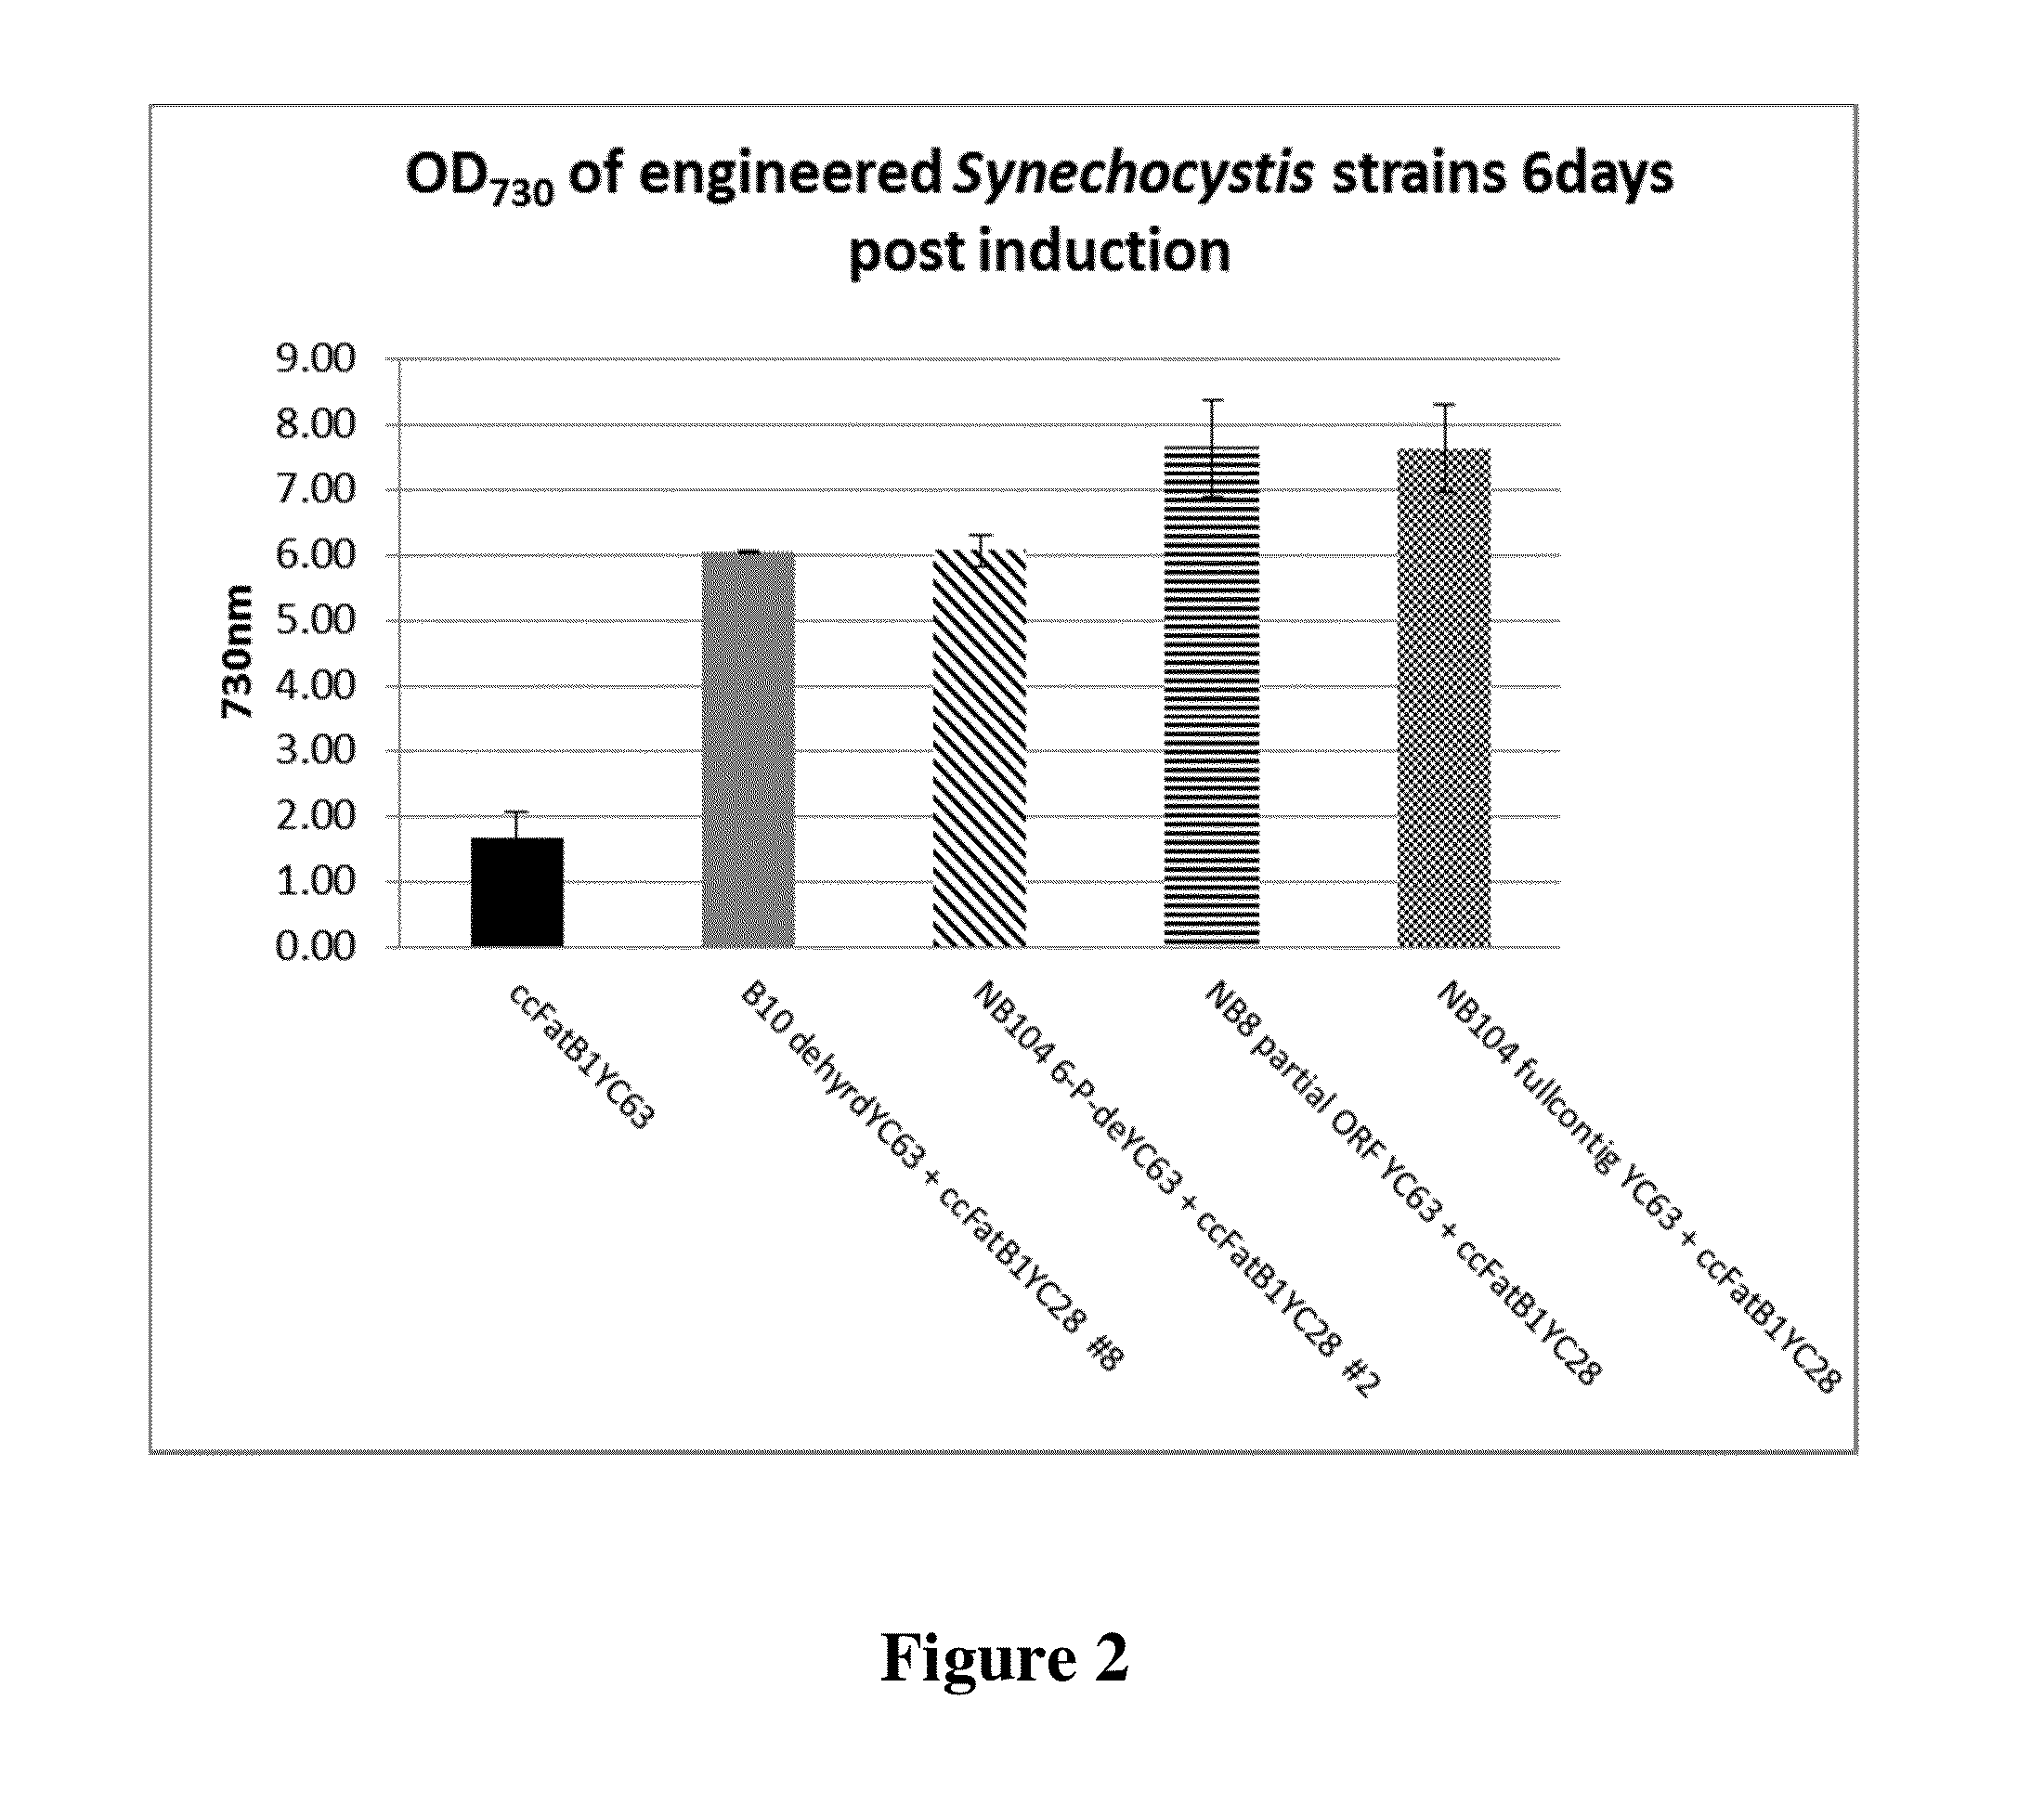 Cell systems and methods for improving fatty acid synthesis by expression of dehydrogenases